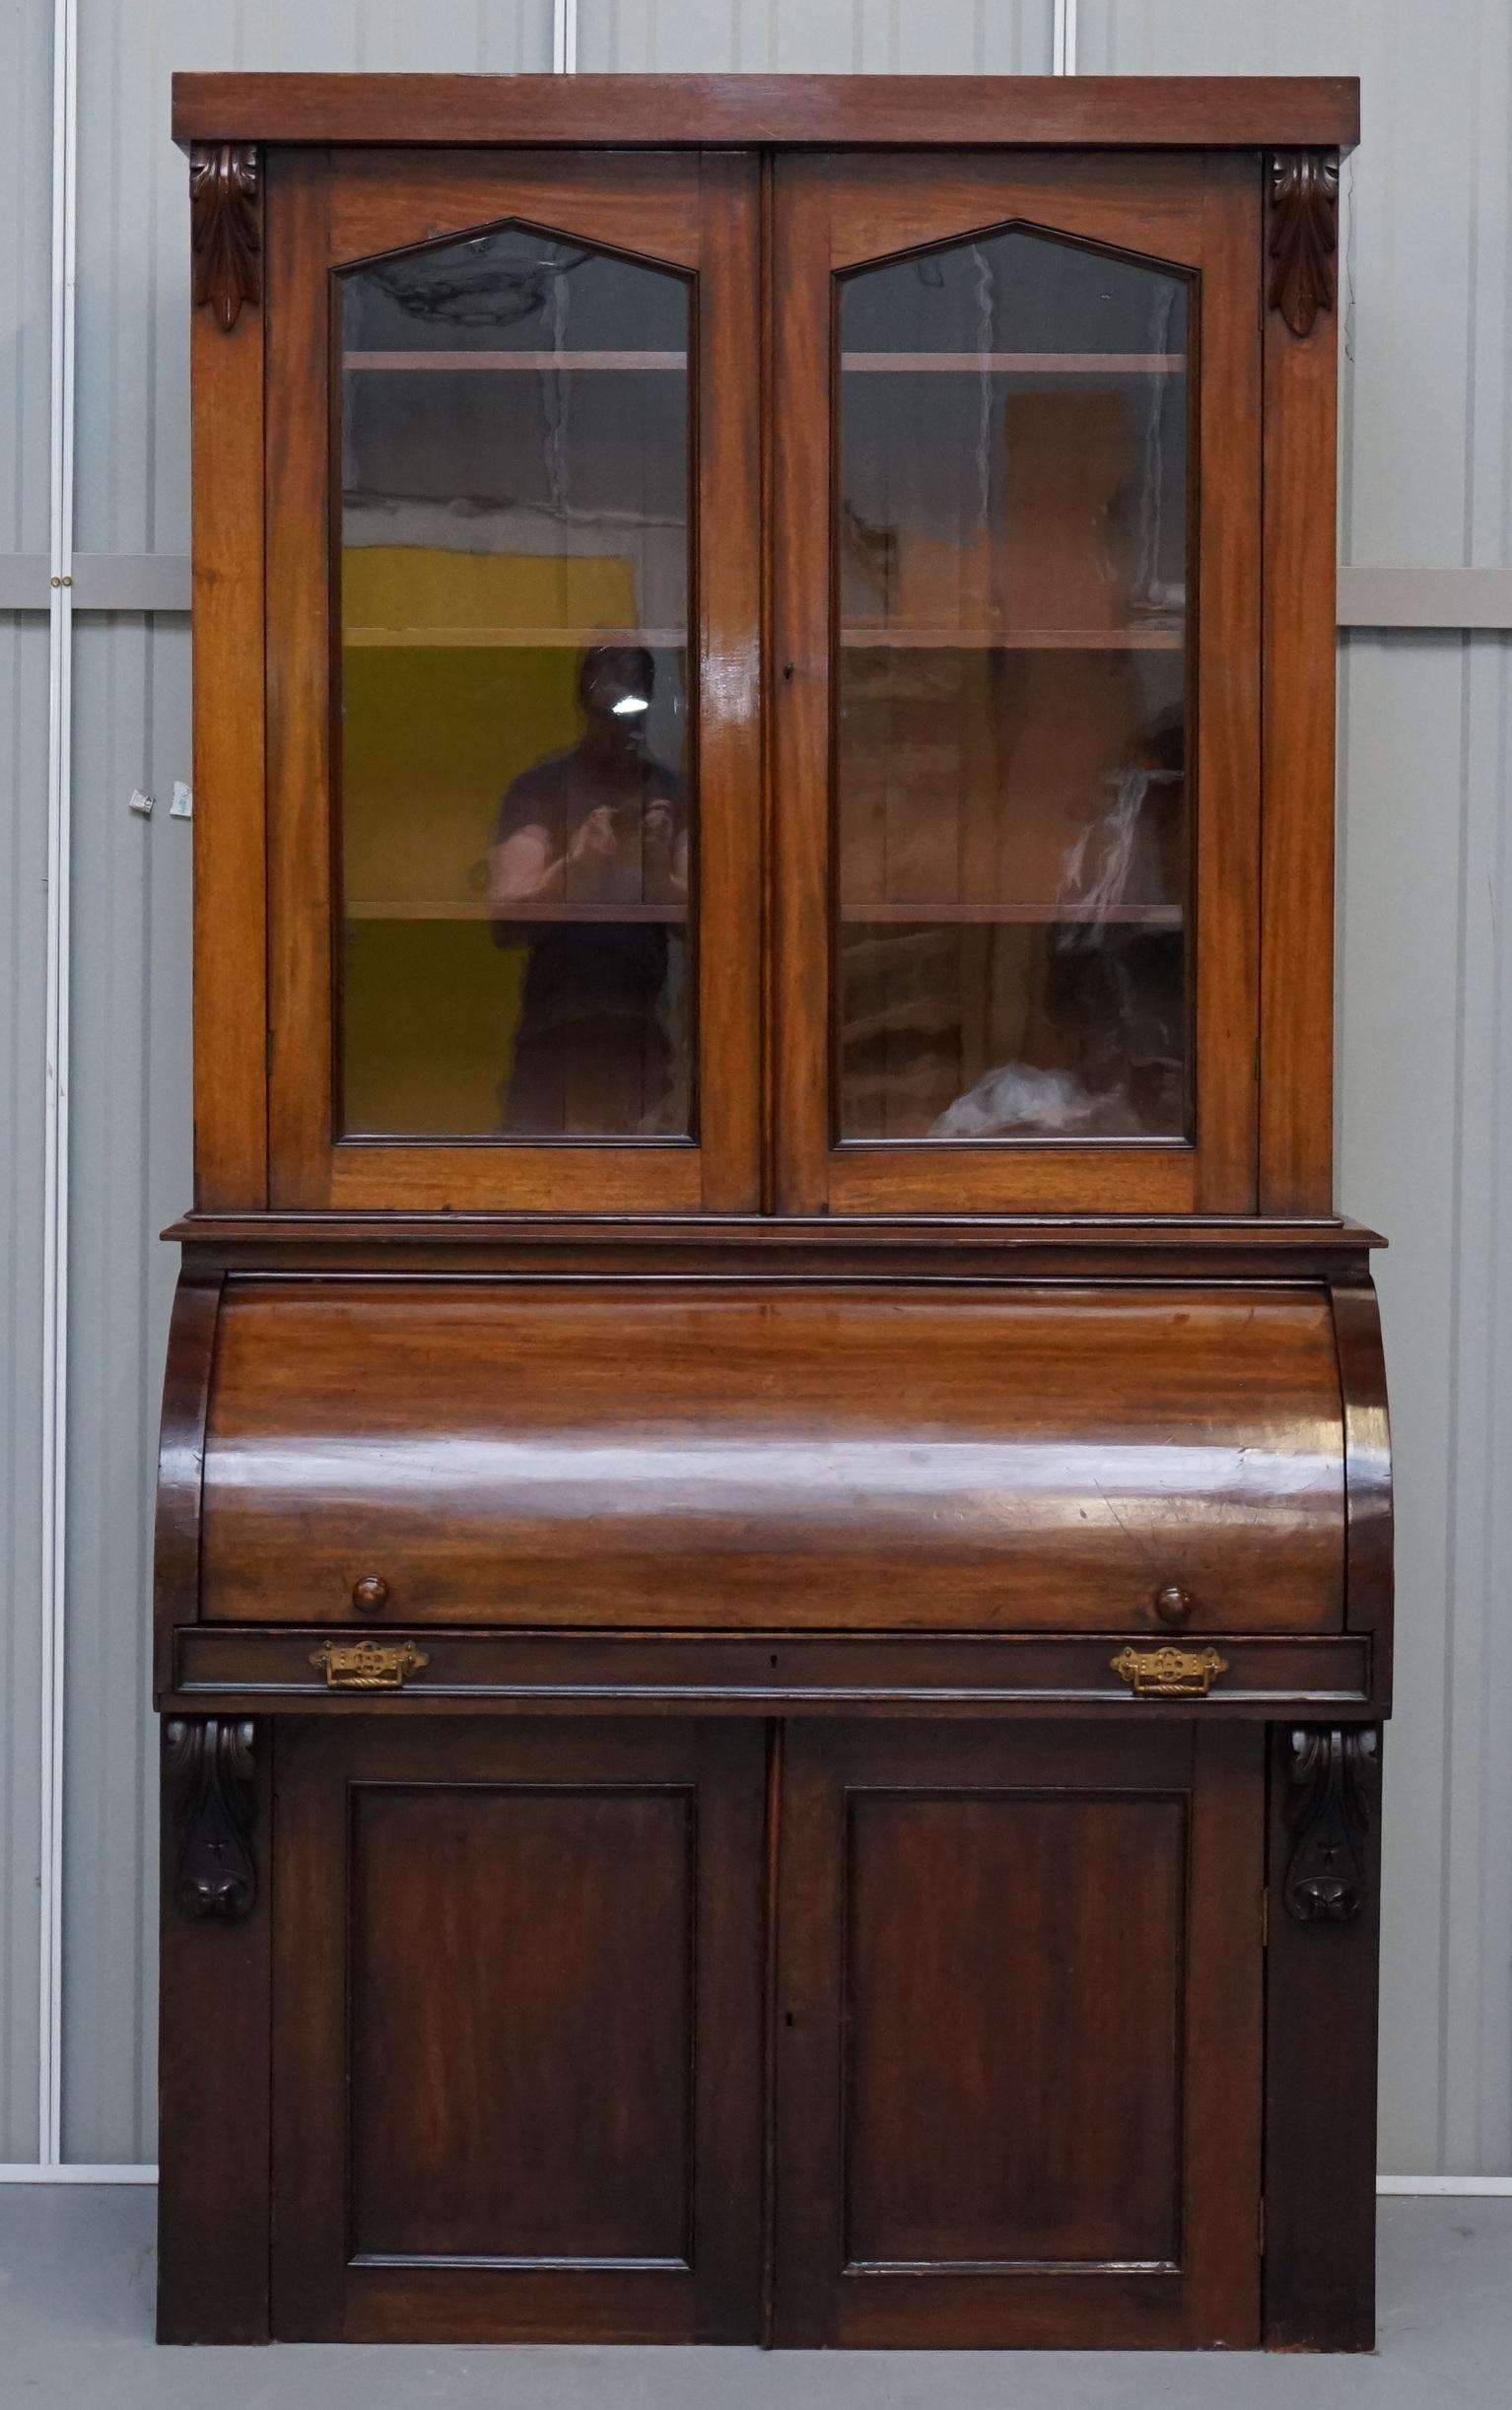 We are delighted to offer for sale this lovely original circa 1870 Victorian Eastlake cylinder roll top secretaire desk bookcase

A good looking well made and multi-functional piece of furniture. The top section is a glazed cabinet bookcase with